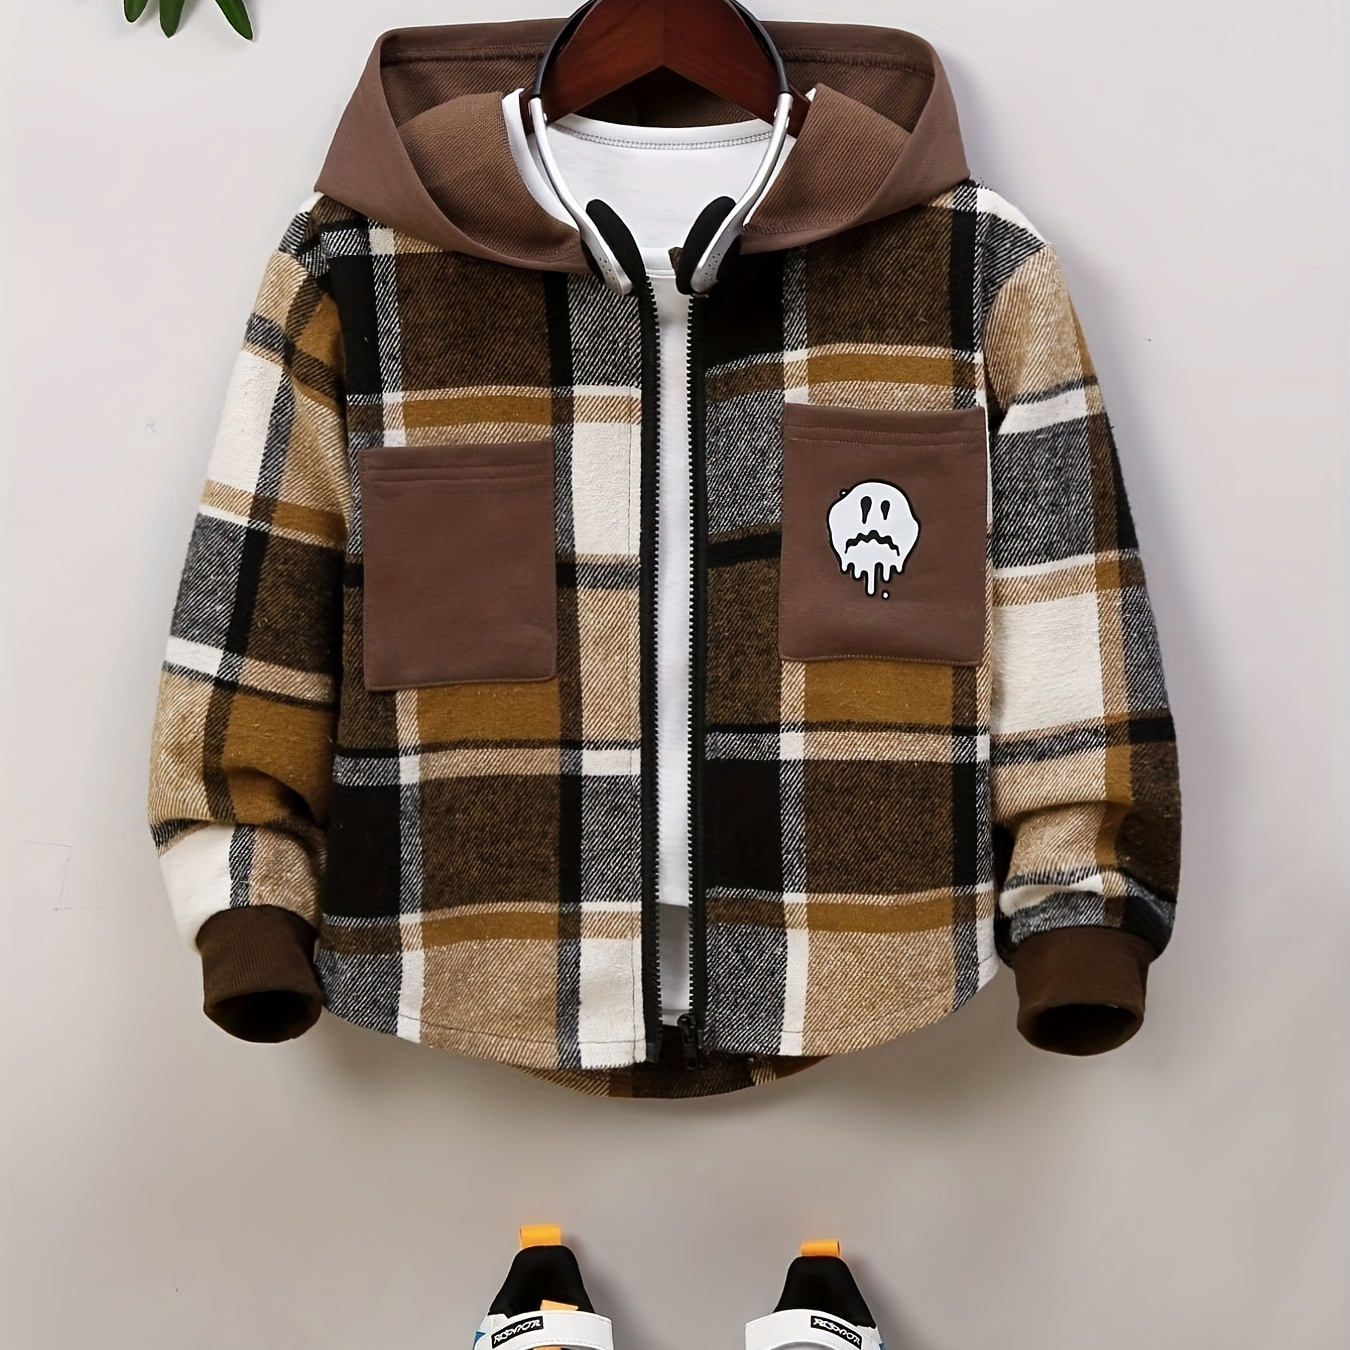 

Funny Sad Smiling Face Print Boys Plaid Zip Up Hoodie Sweatshirt Casual Long Sleeve Hoodies With Pockets Gym Sports Hooded Jacket